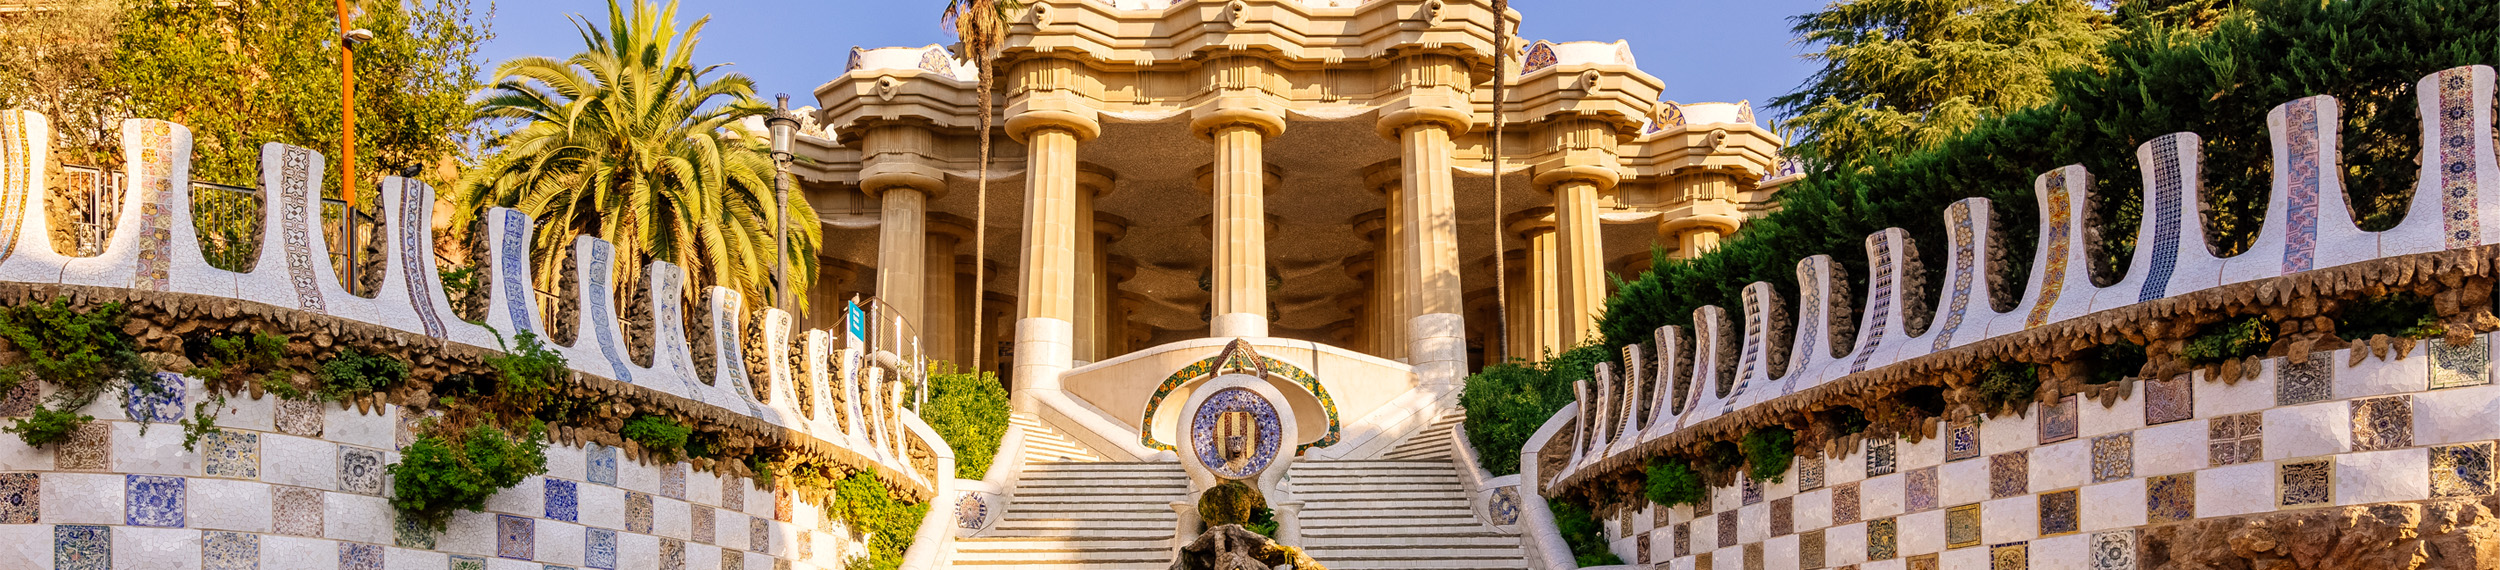 The entrance to the public park, Park Guell on a sunny day in Barcelona, Spain.